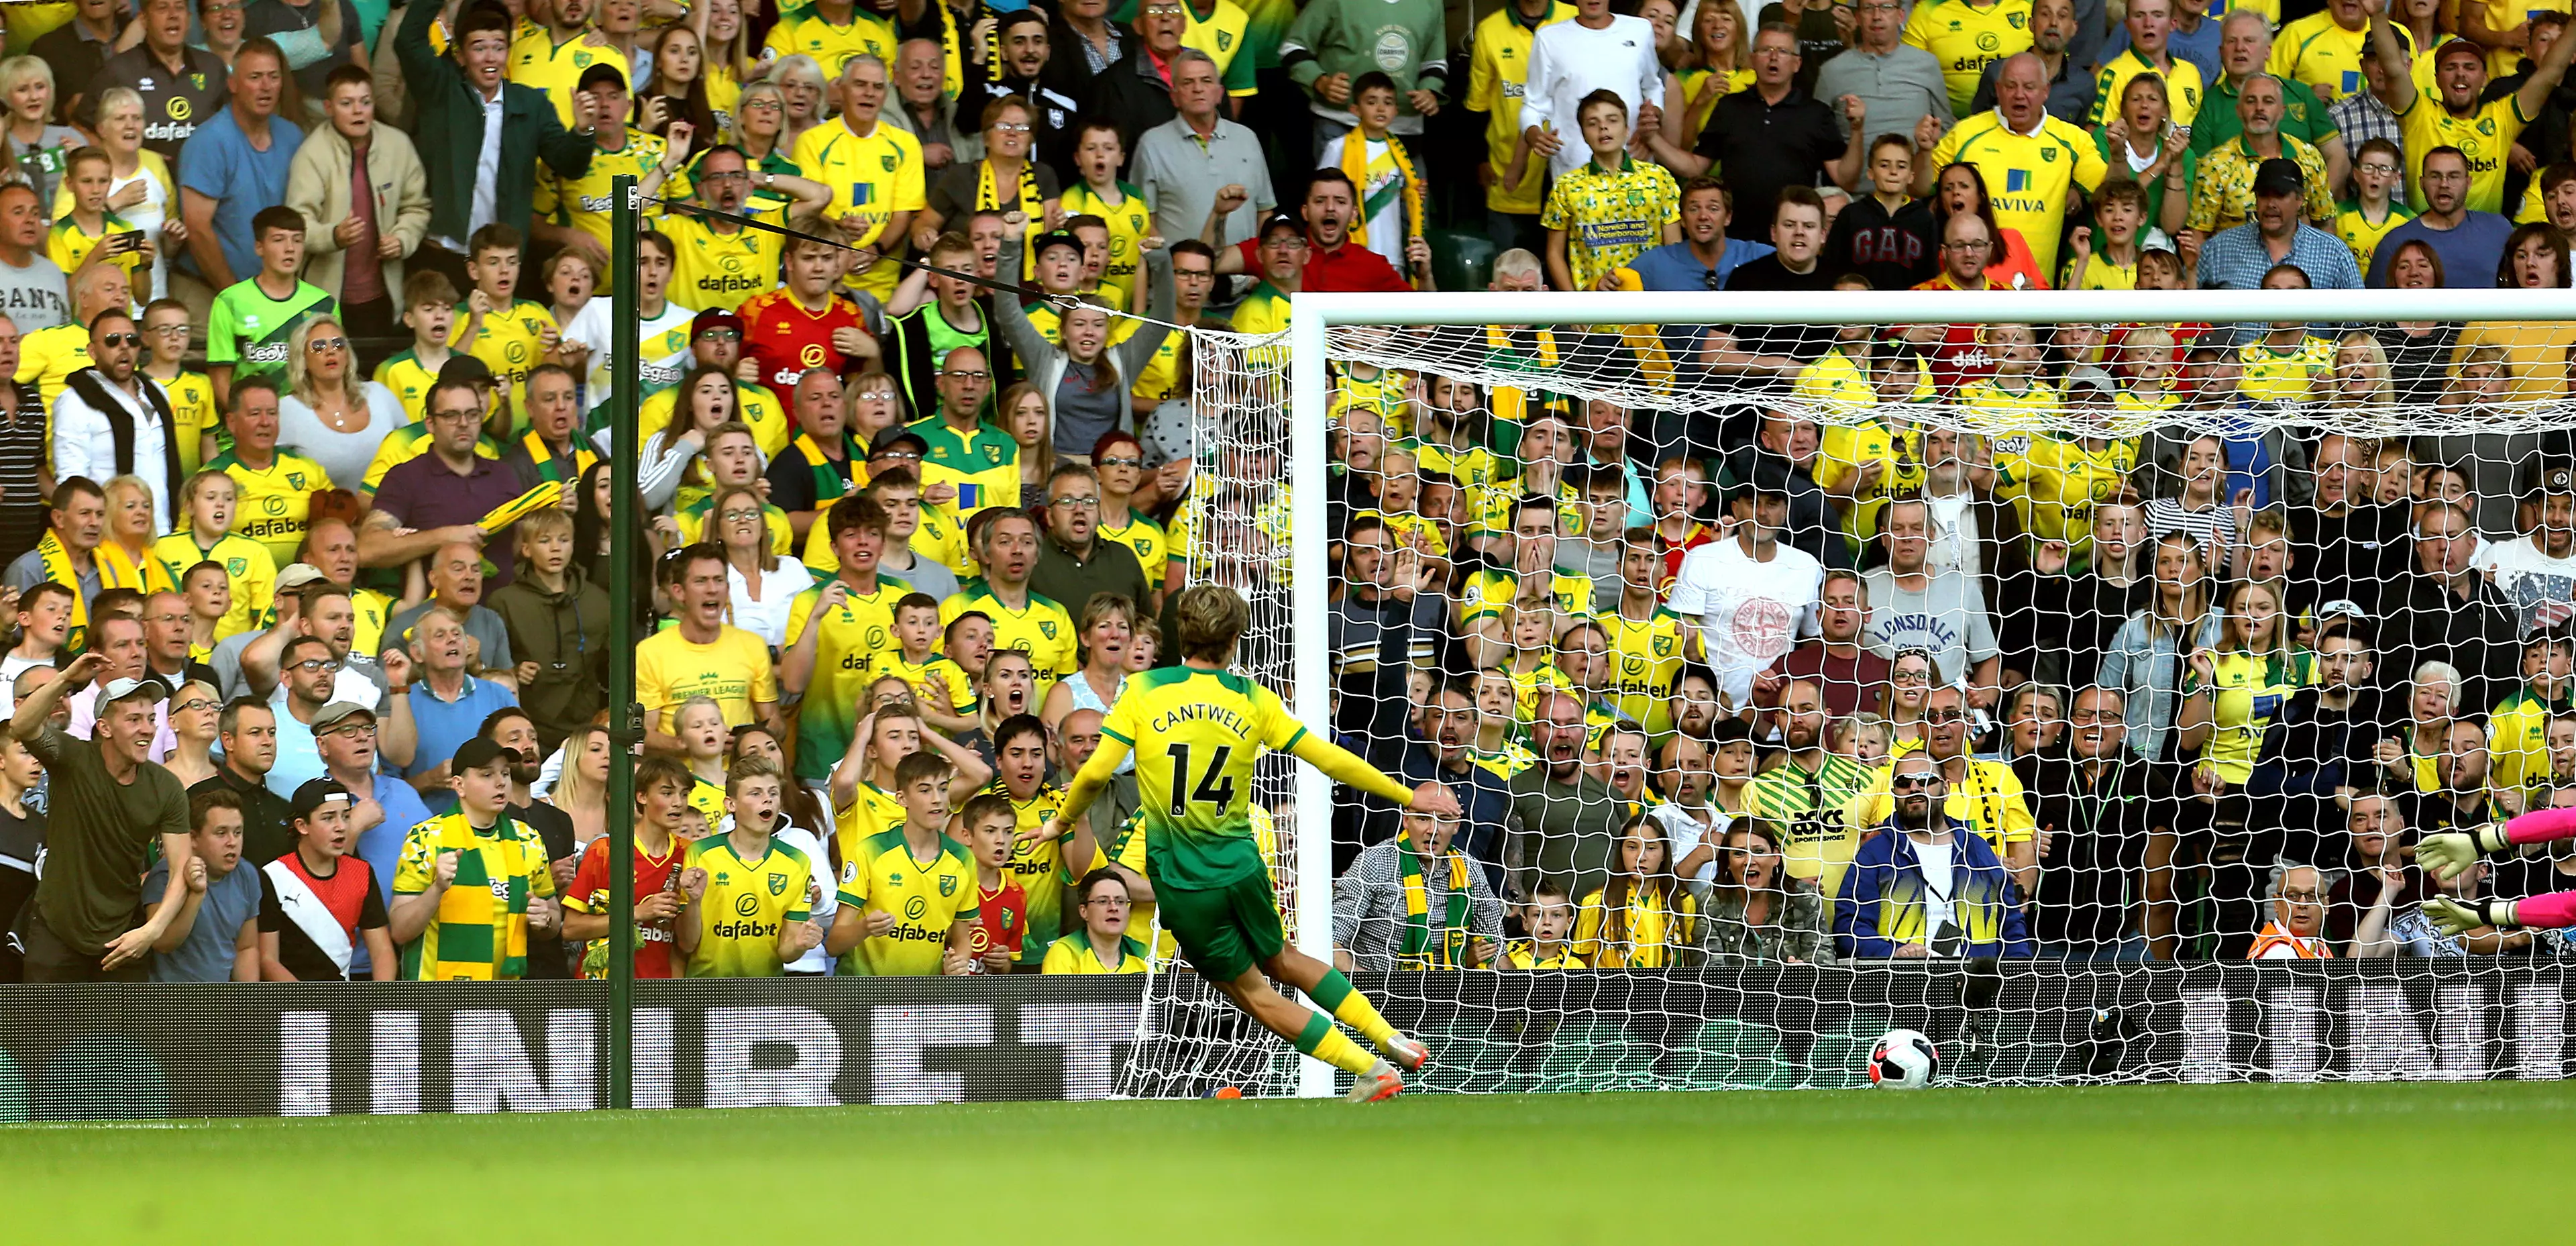 Todd Cantwell added Norwich's second goal in the first half